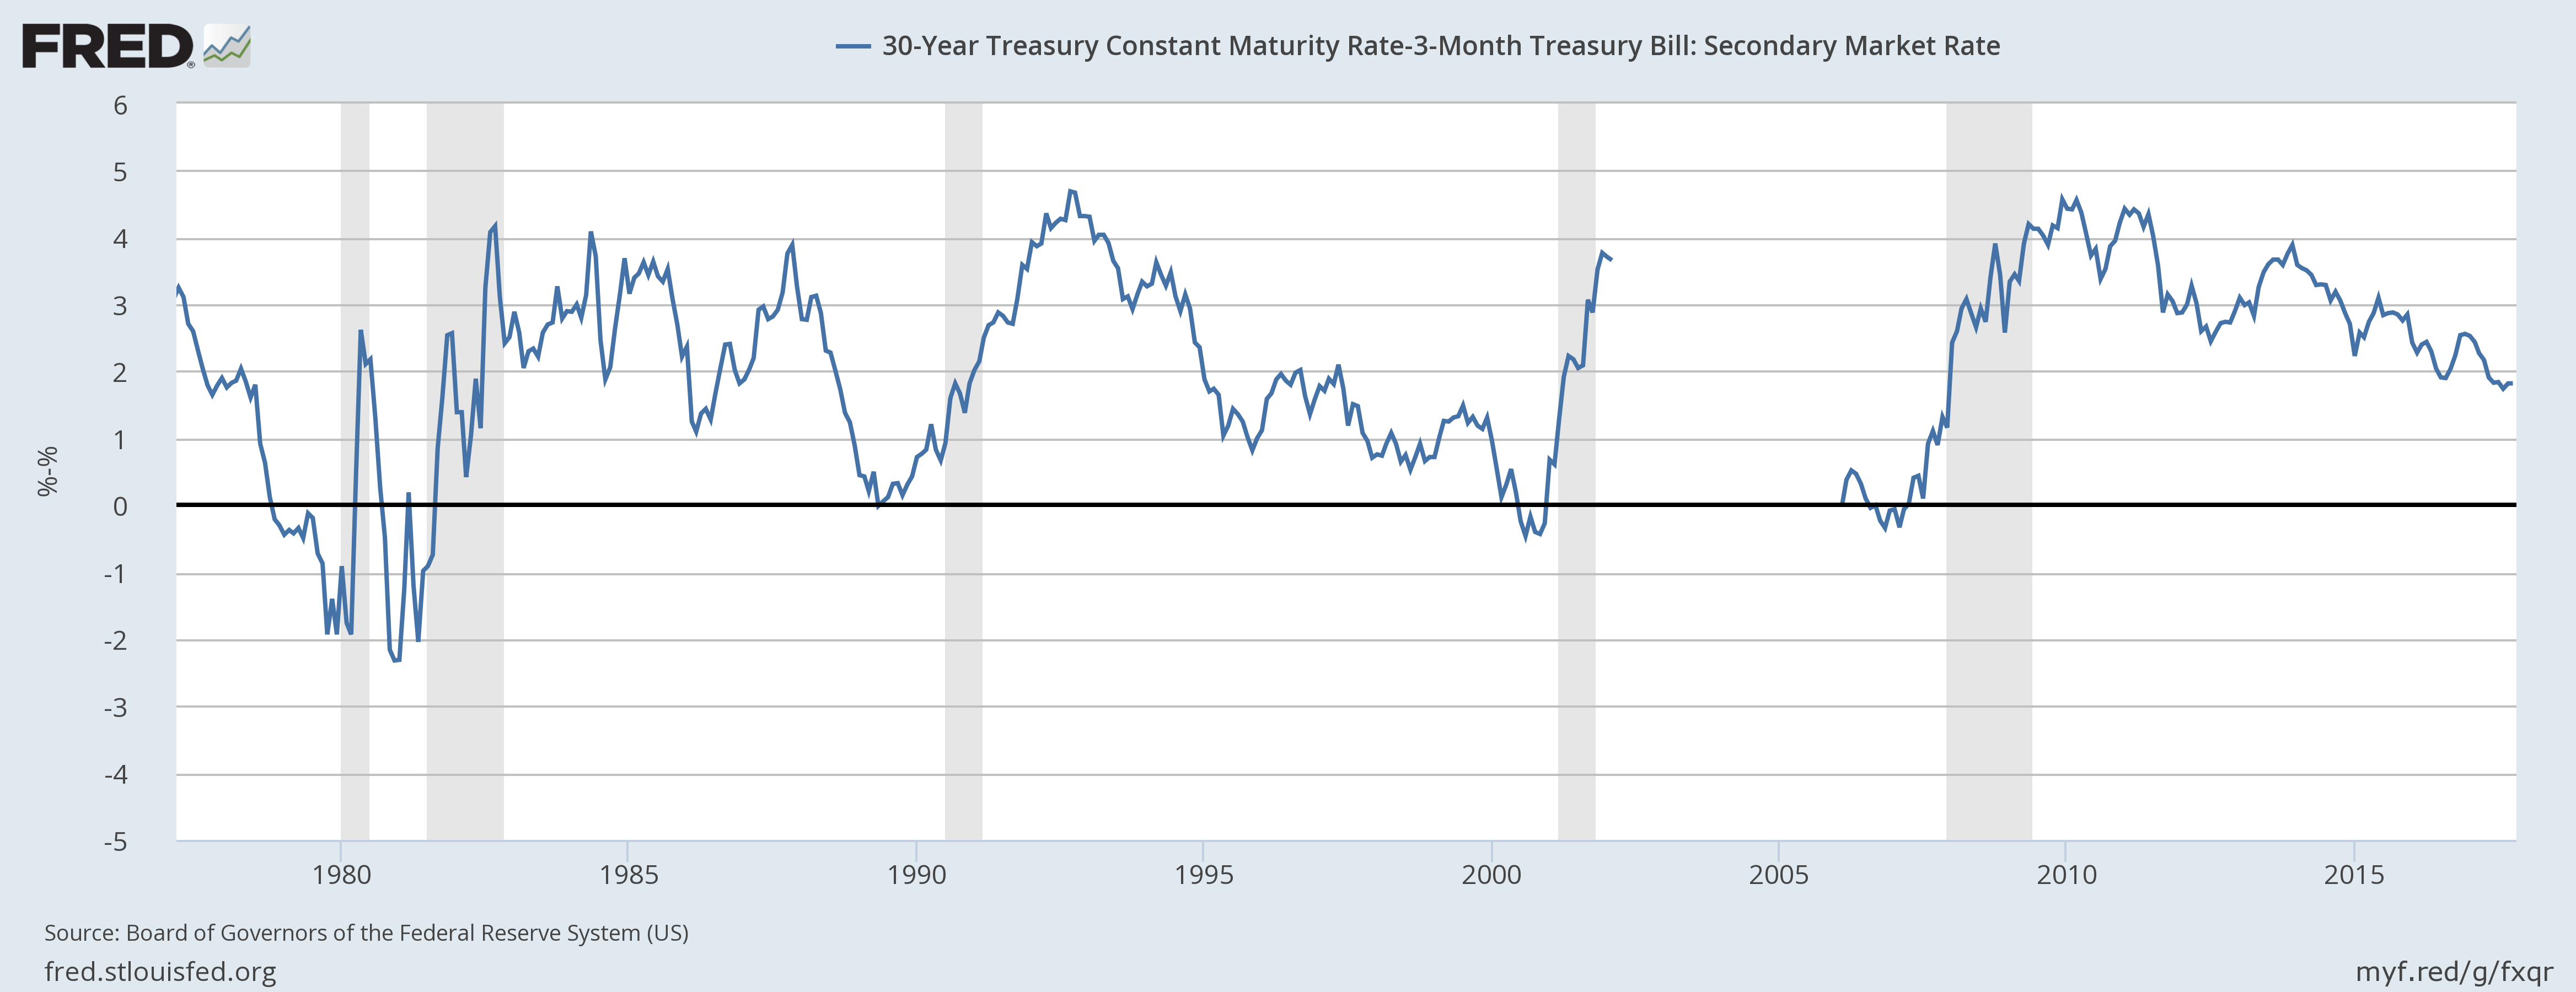 30-Y Constant Maturity Rate 3-M Secondary Market Rate